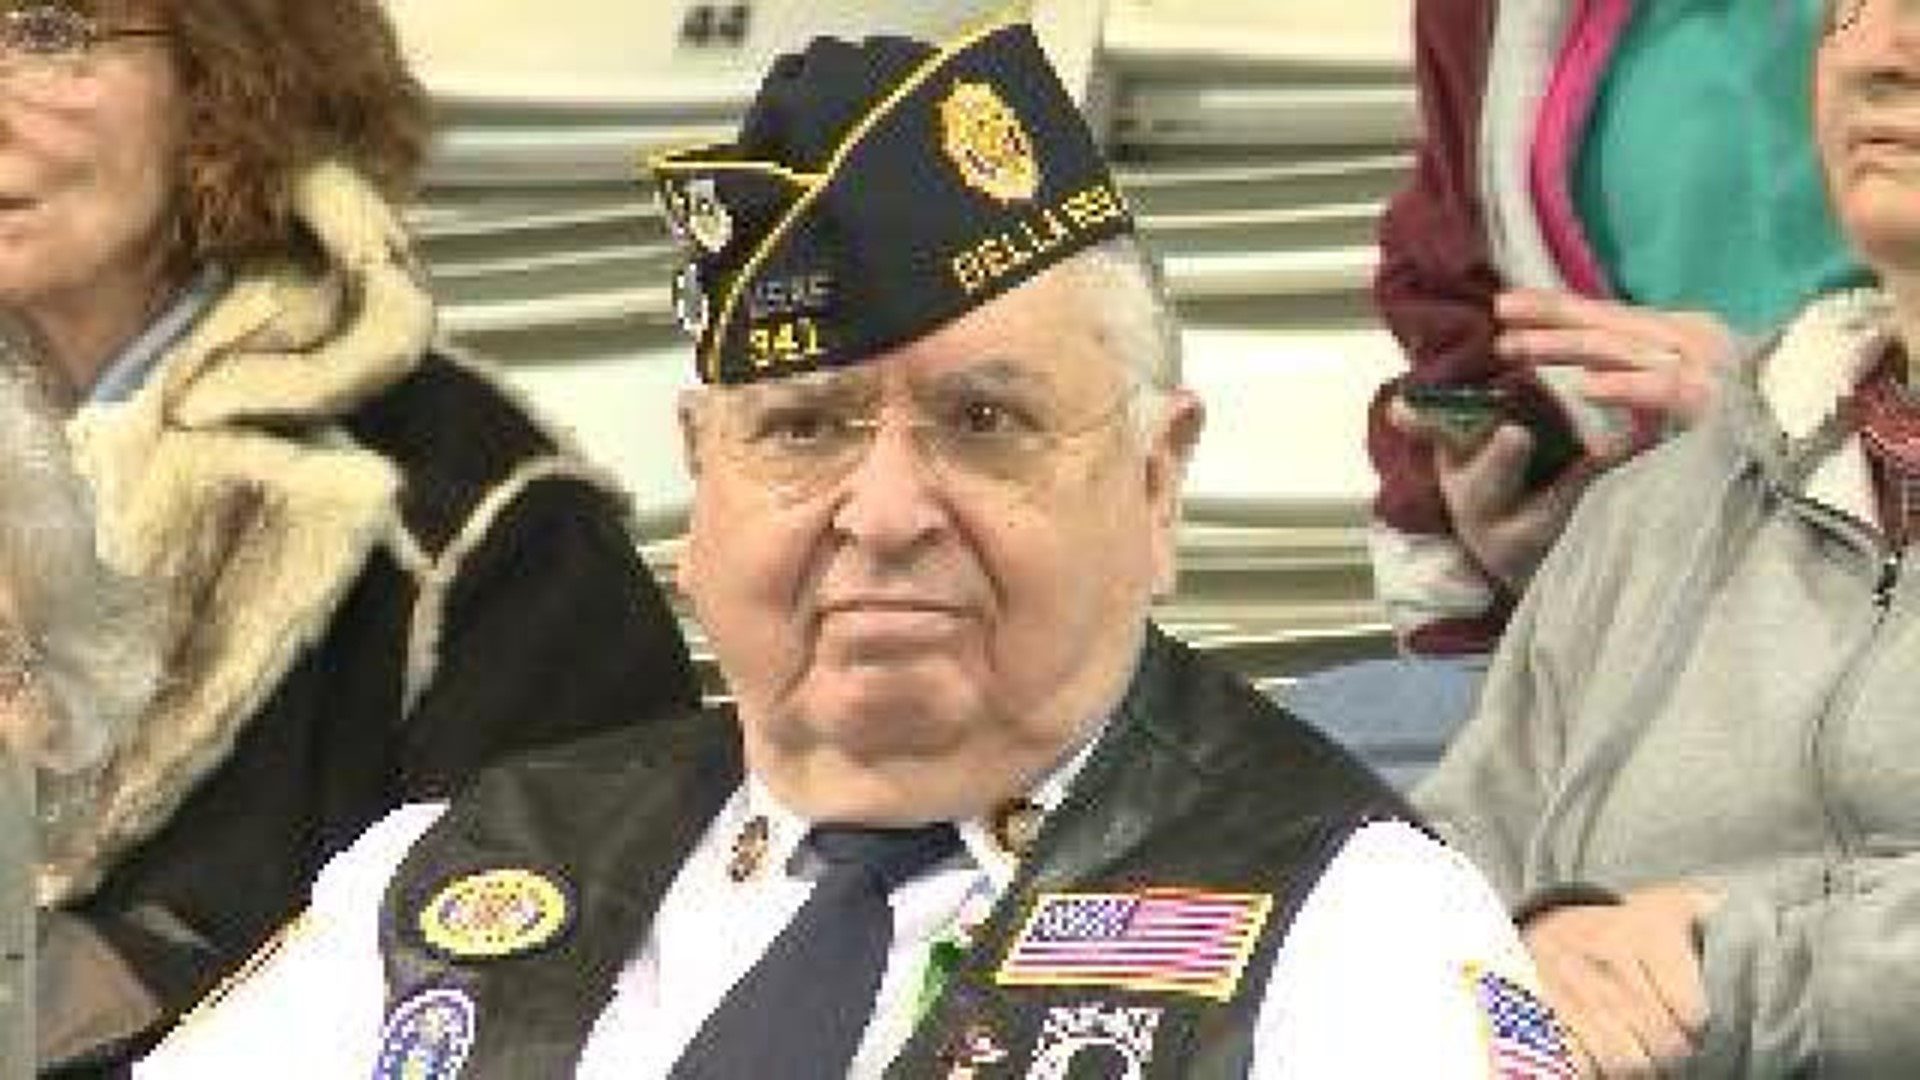 Second Annual Welcome Home Veterans Event